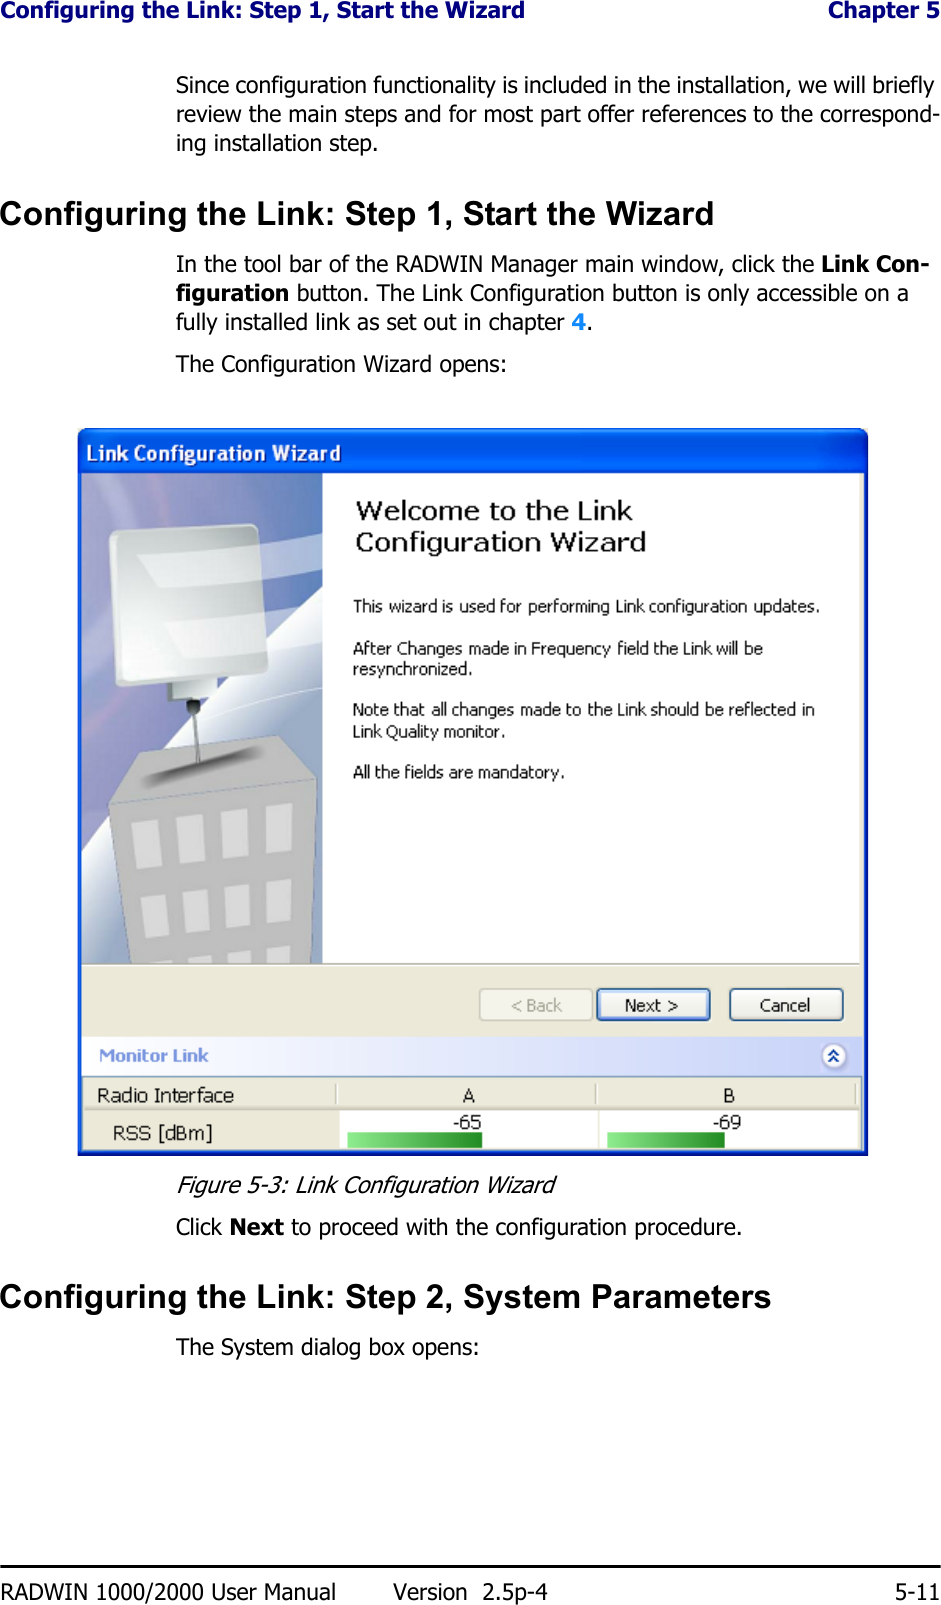 Configuring the Link: Step 1, Start the Wizard  Chapter 5RADWIN 1000/2000 User Manual Version  2.5p-4 5-11Since configuration functionality is included in the installation, we will briefly review the main steps and for most part offer references to the correspond-ing installation step.Configuring the Link: Step 1, Start the WizardIn the tool bar of the RADWIN Manager main window, click the Link Con-figuration button. The Link Configuration button is only accessible on a fully installed link as set out in chapter 4.The Configuration Wizard opens:Figure 5-3: Link Configuration WizardClick Next to proceed with the configuration procedure.Configuring the Link: Step 2, System ParametersThe System dialog box opens: